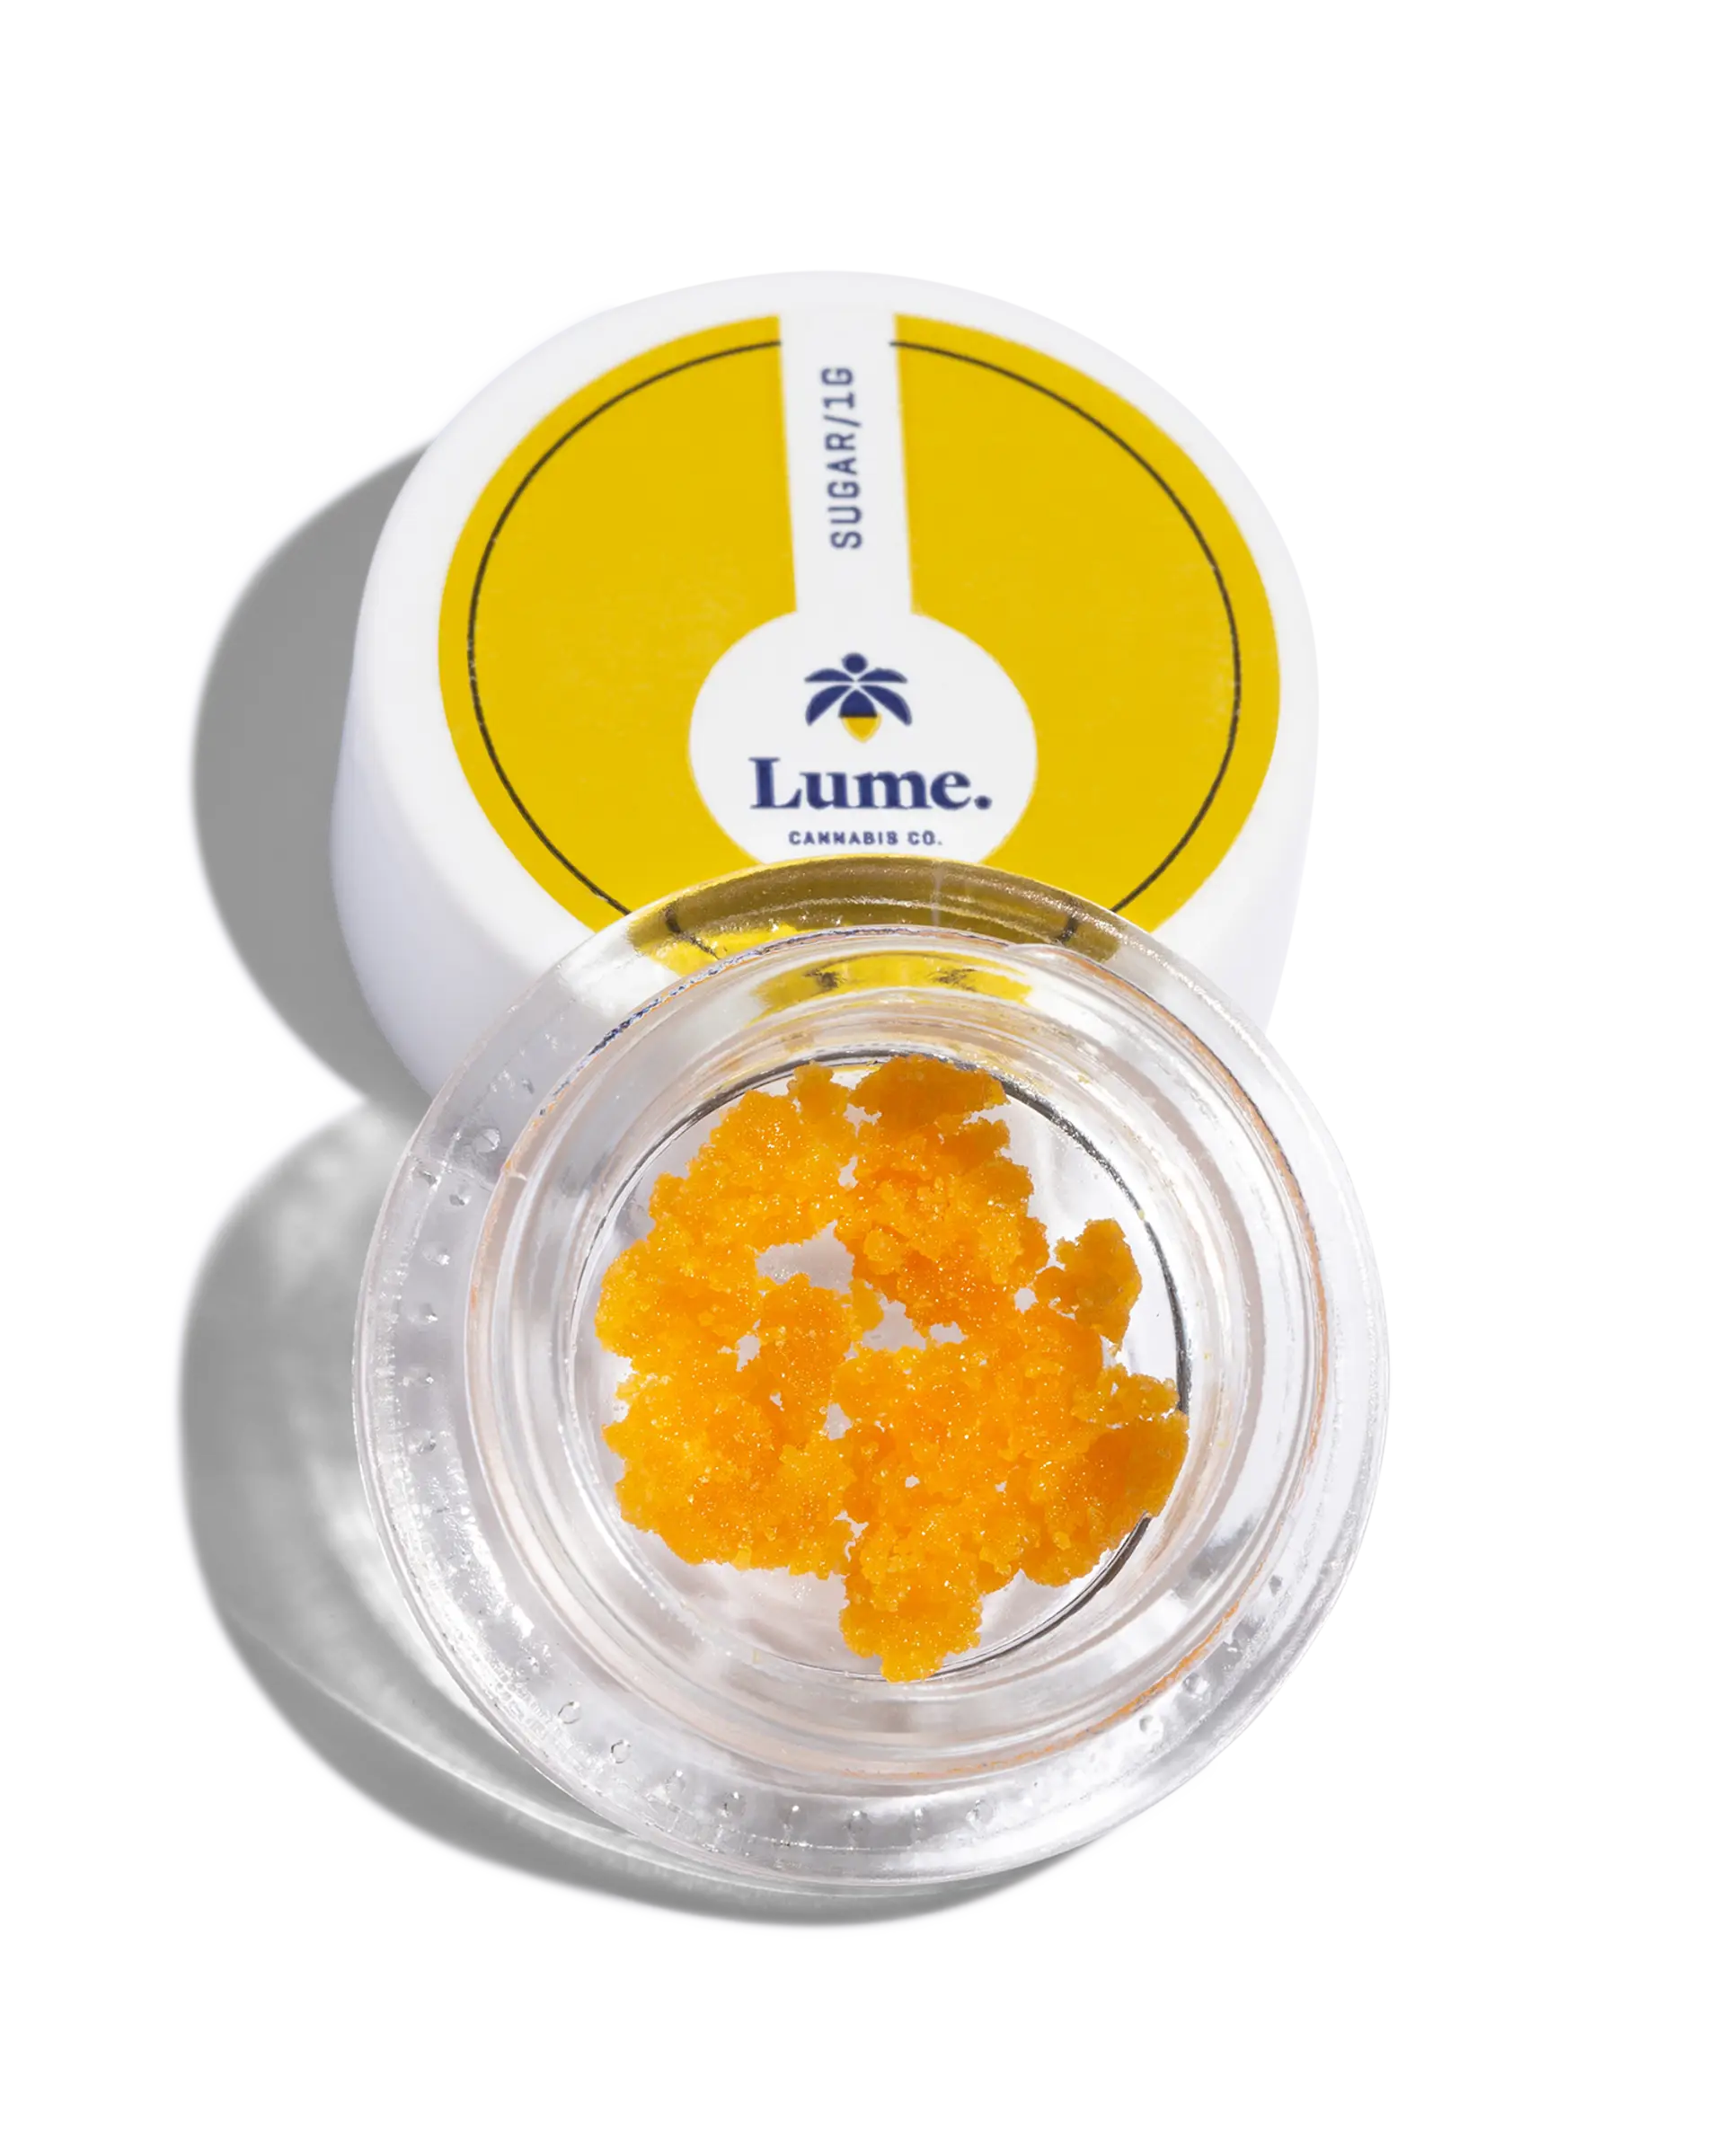 Hella Jelly X Pineapple Muffin Live Resin Sugar 1g